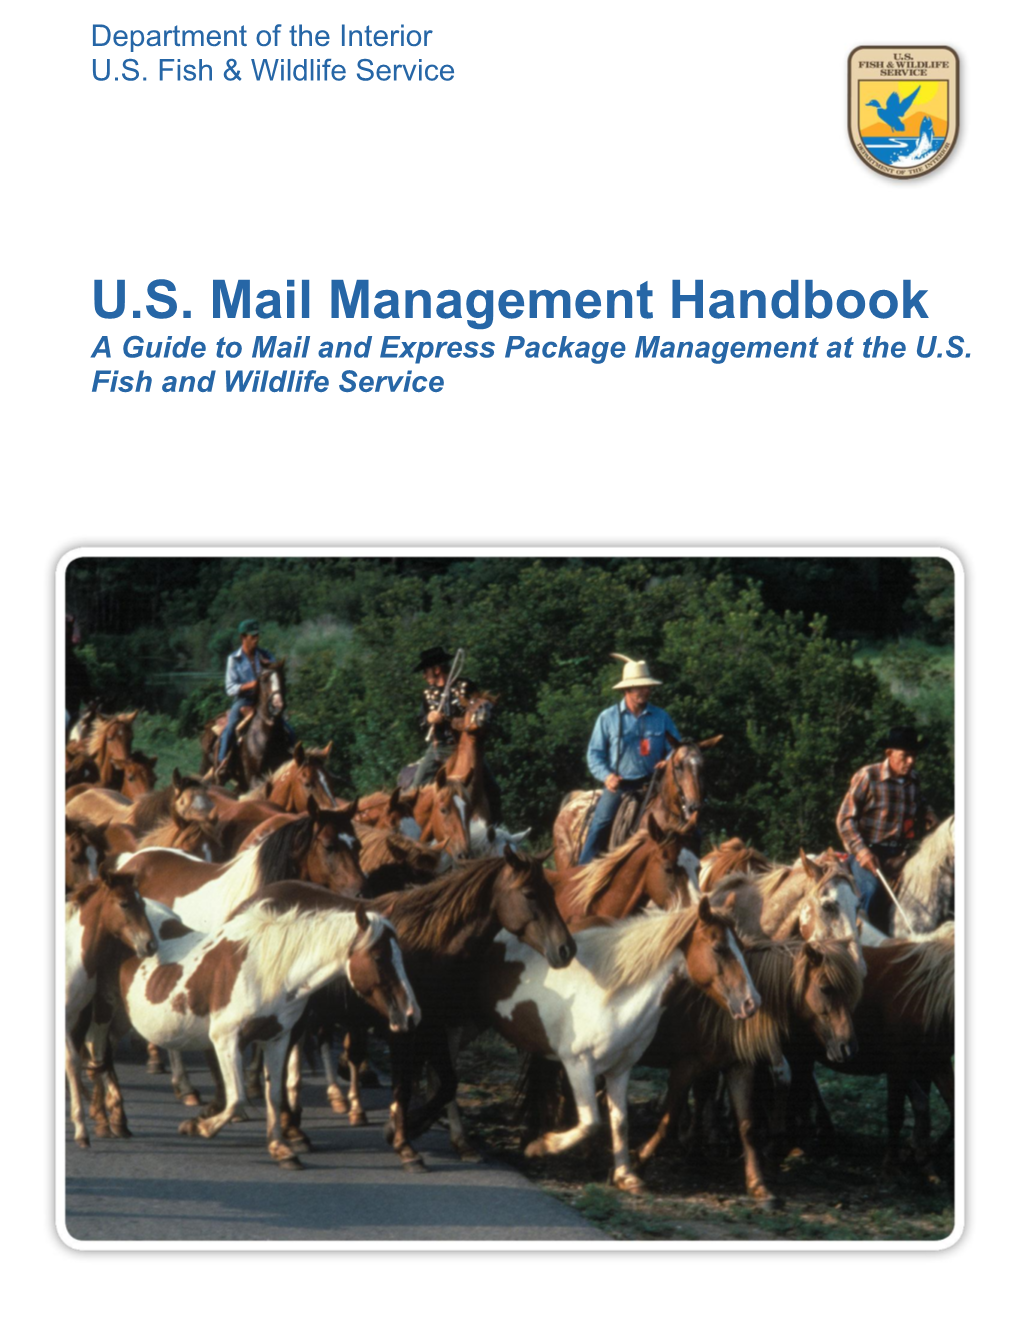 U.S. Mail Management Handbook a Guide to Mail and Express Package Management at the U.S